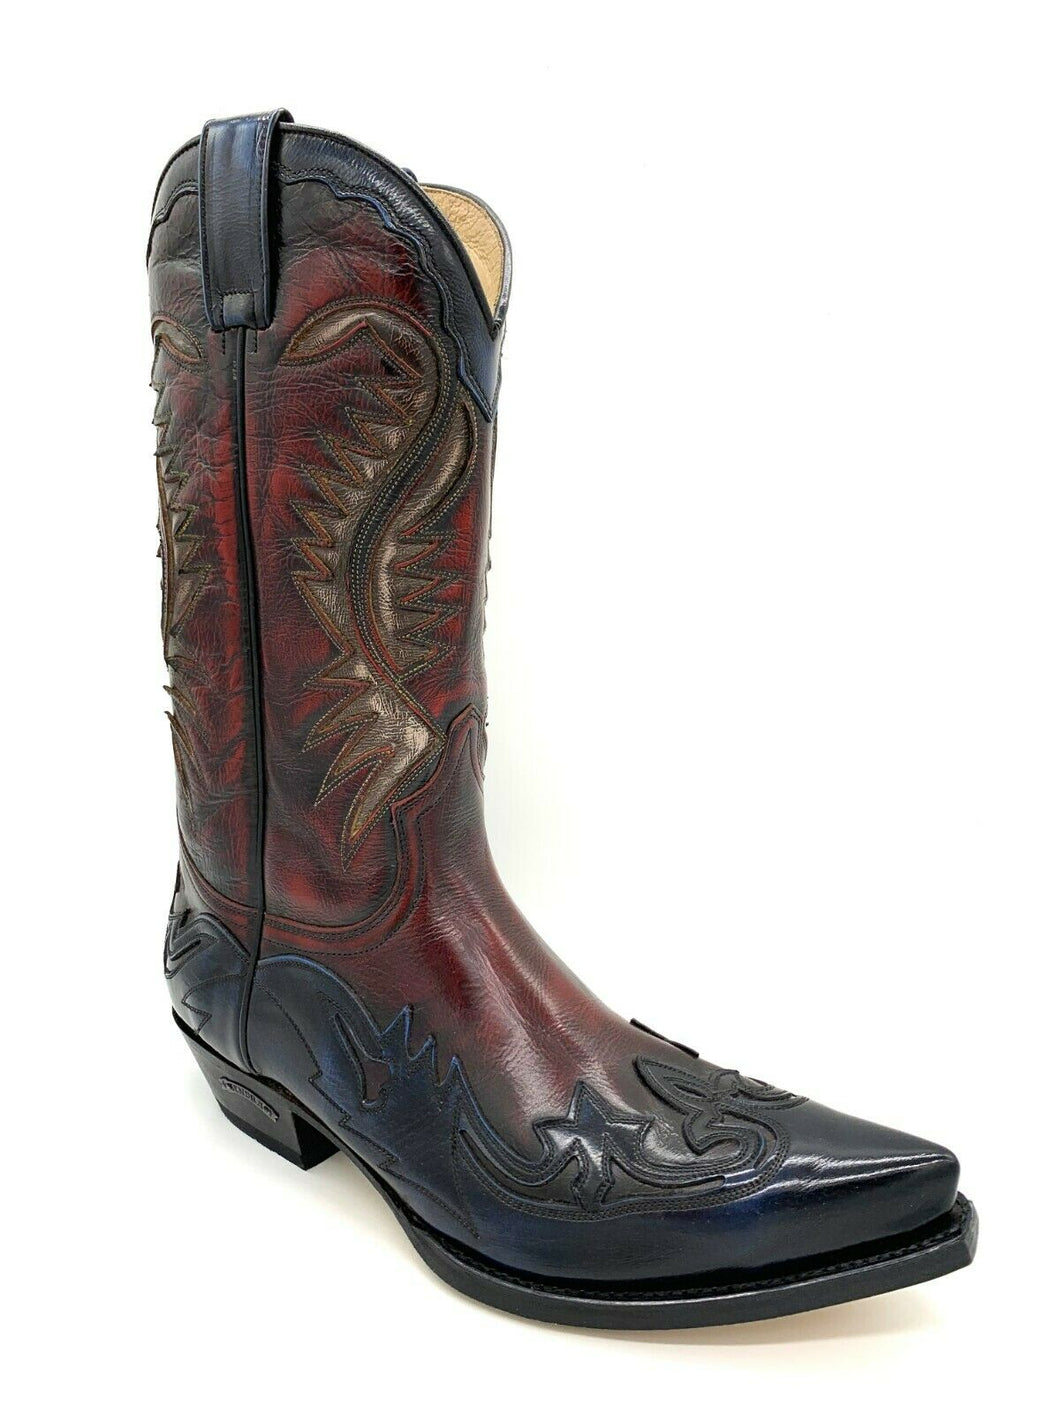 Sendra Boots Western Cowboy Boots Biker Boots Exclusive and Limited Blue Red